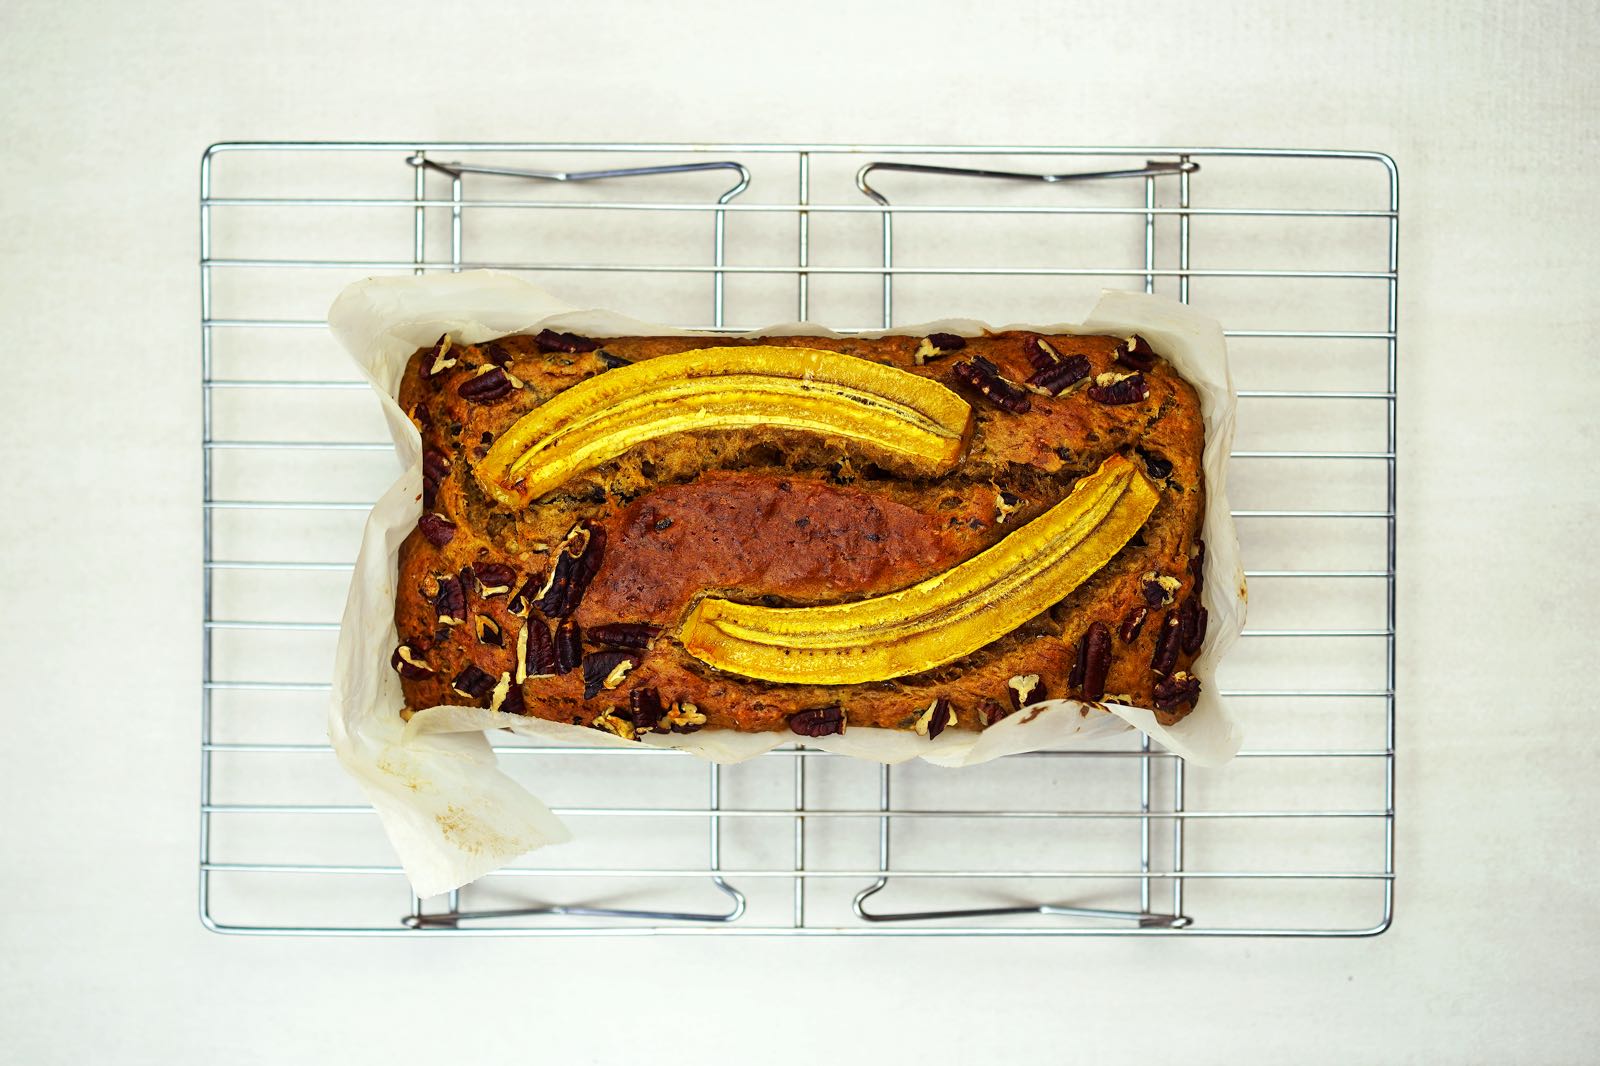 Cooling fresh-baked banana bread in a loaf pan